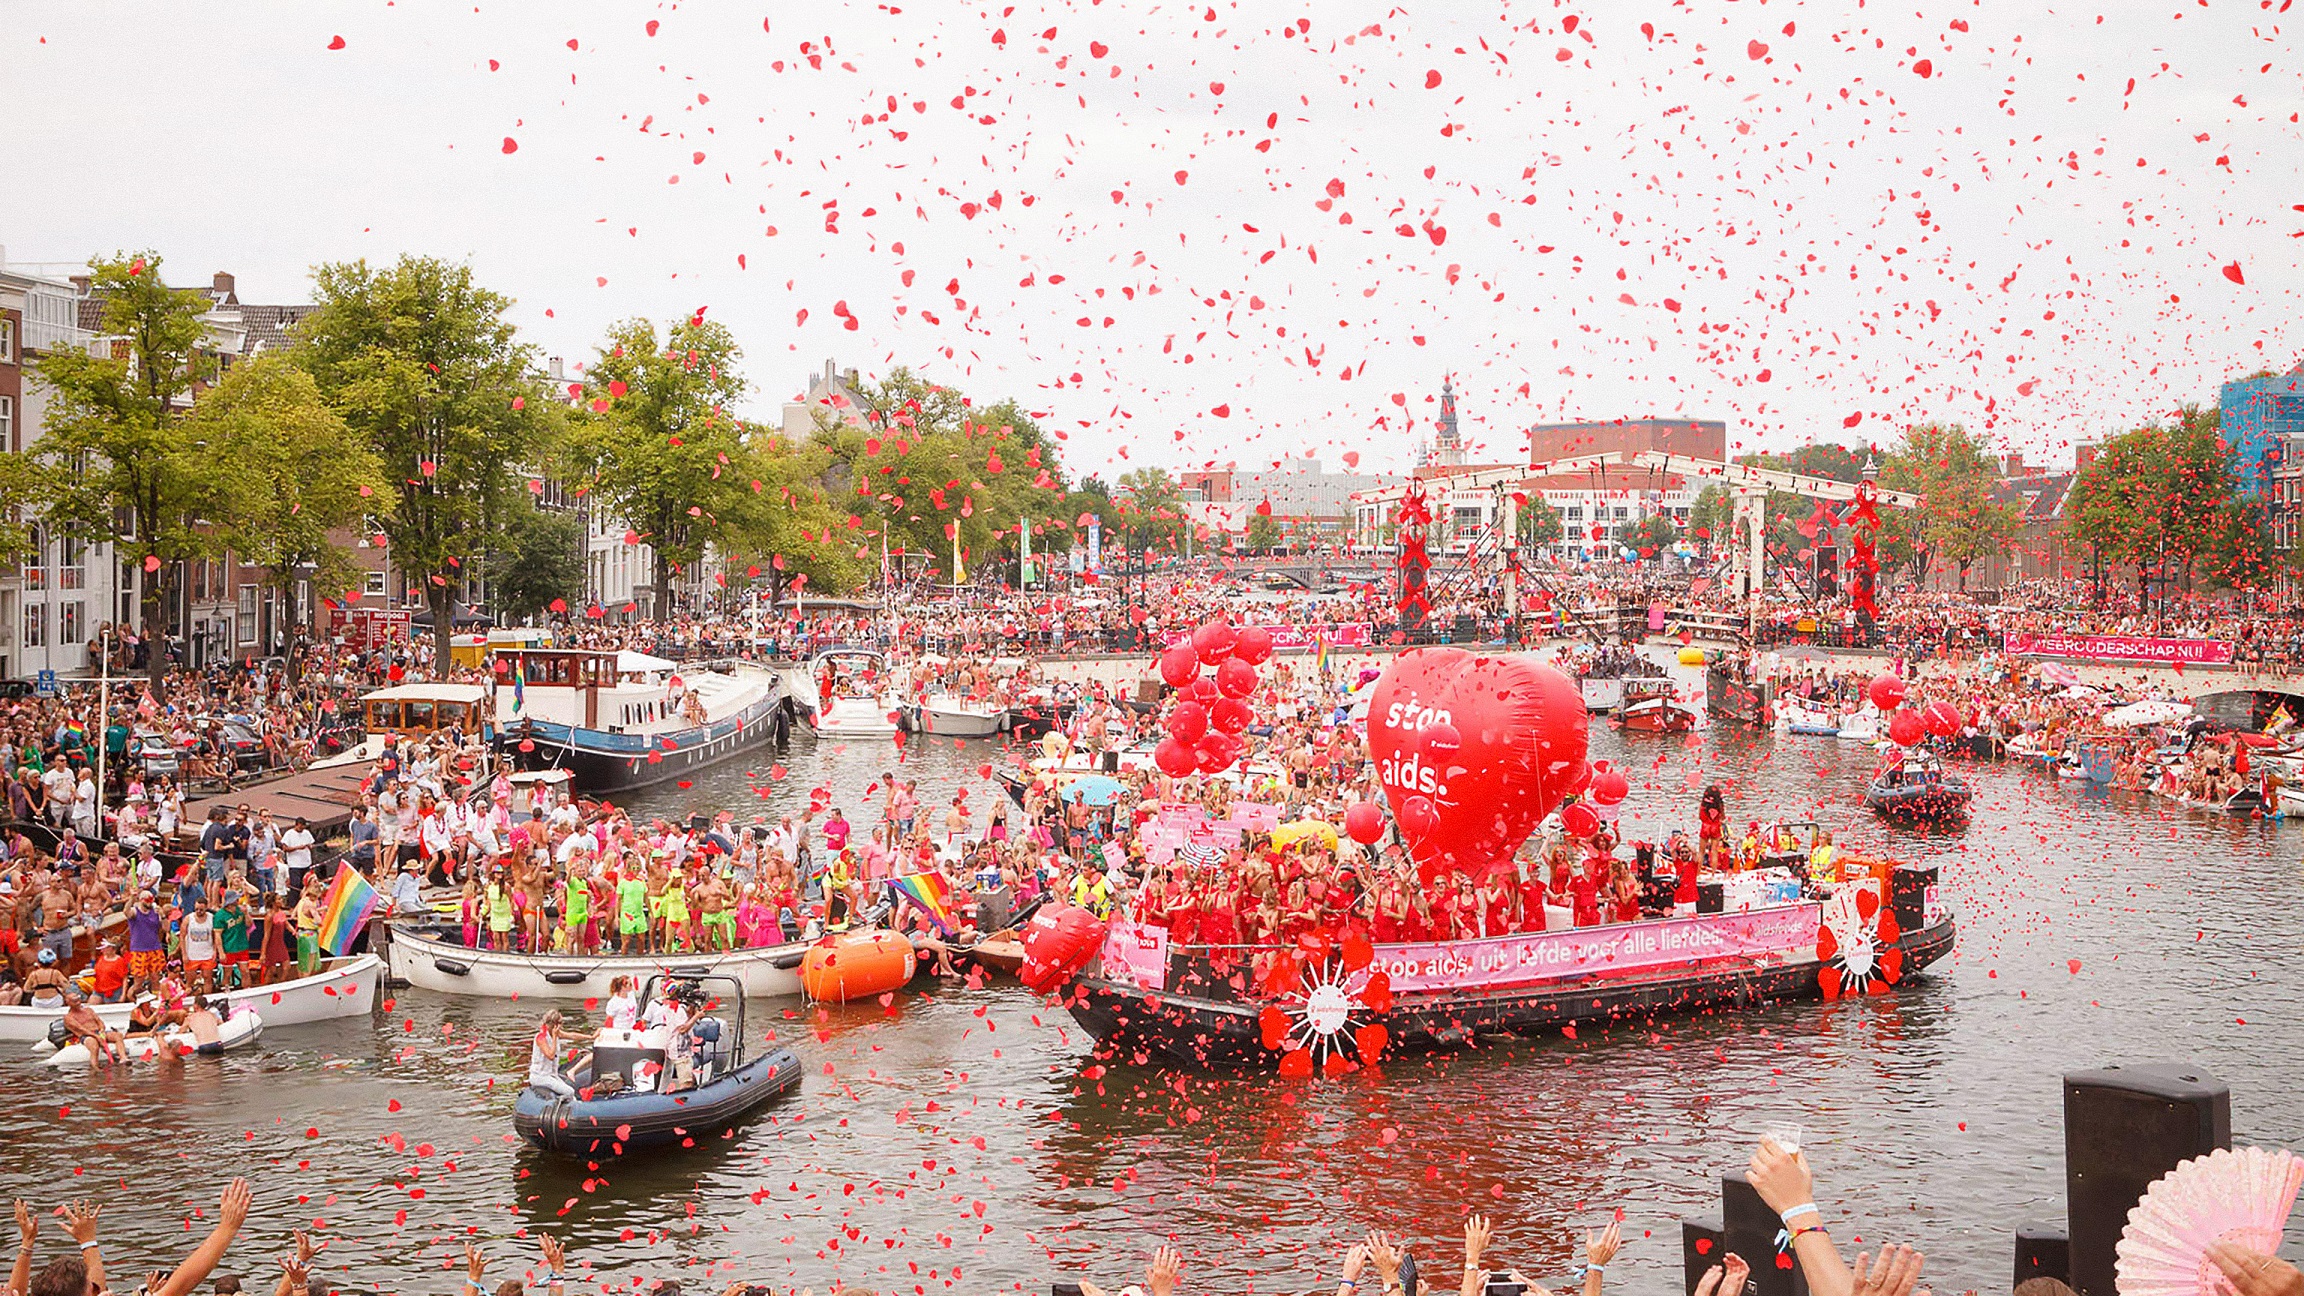 Pride travel: Amsterdam Pride on the canals